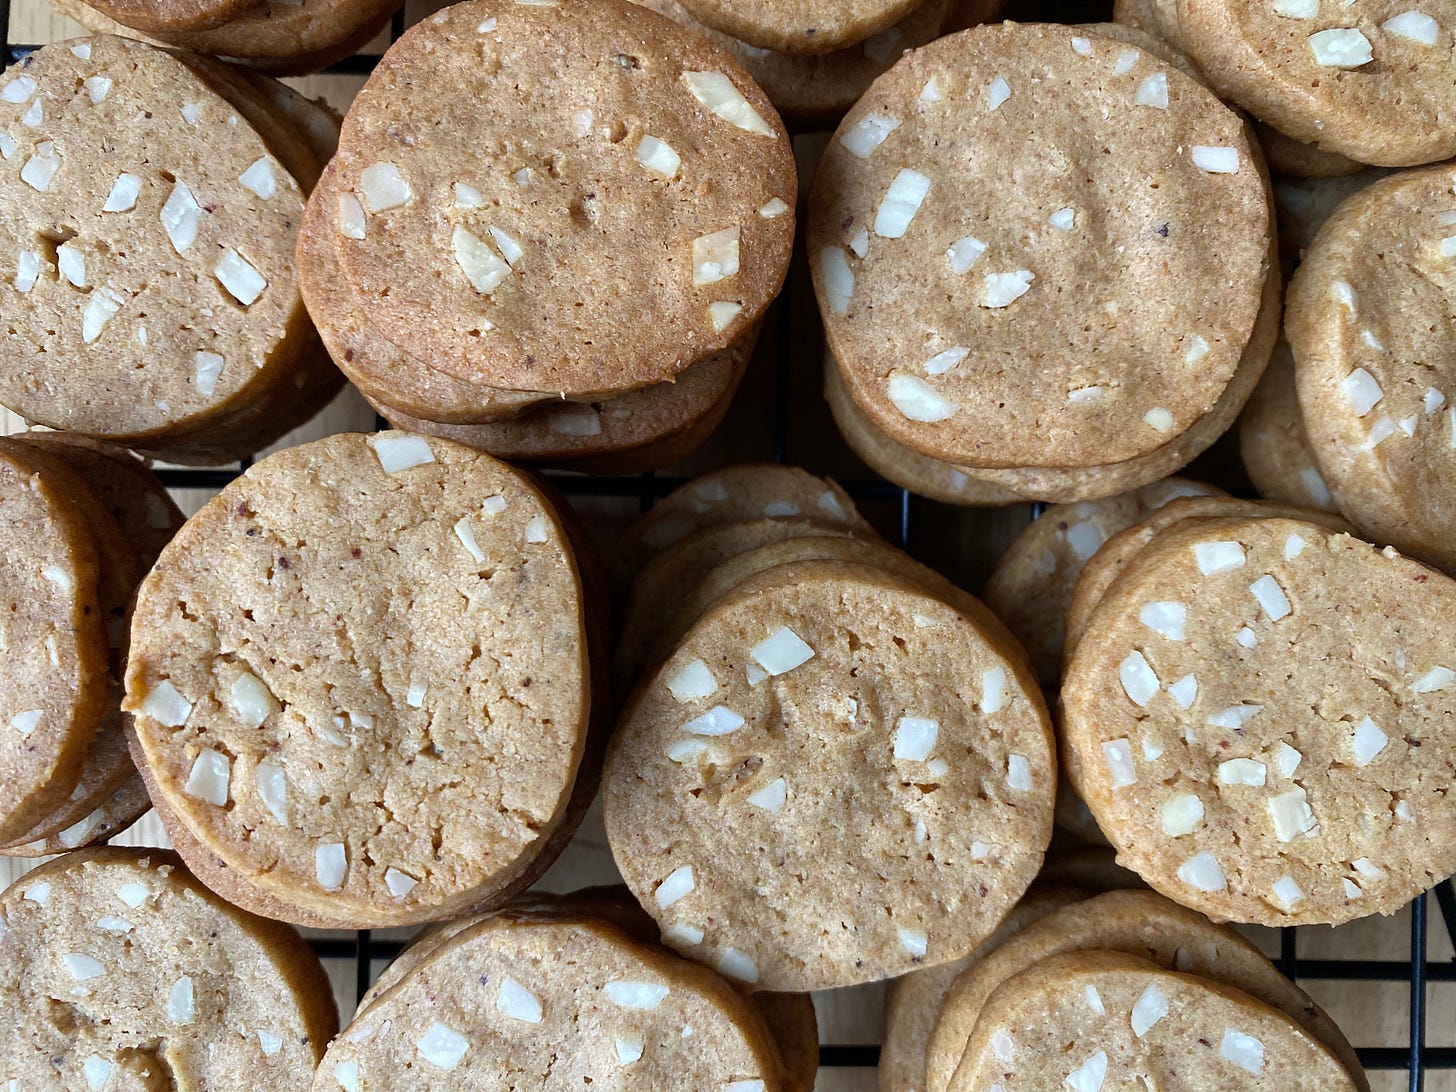 Stacks of small round cookies, lightly brown and studded with almonds.